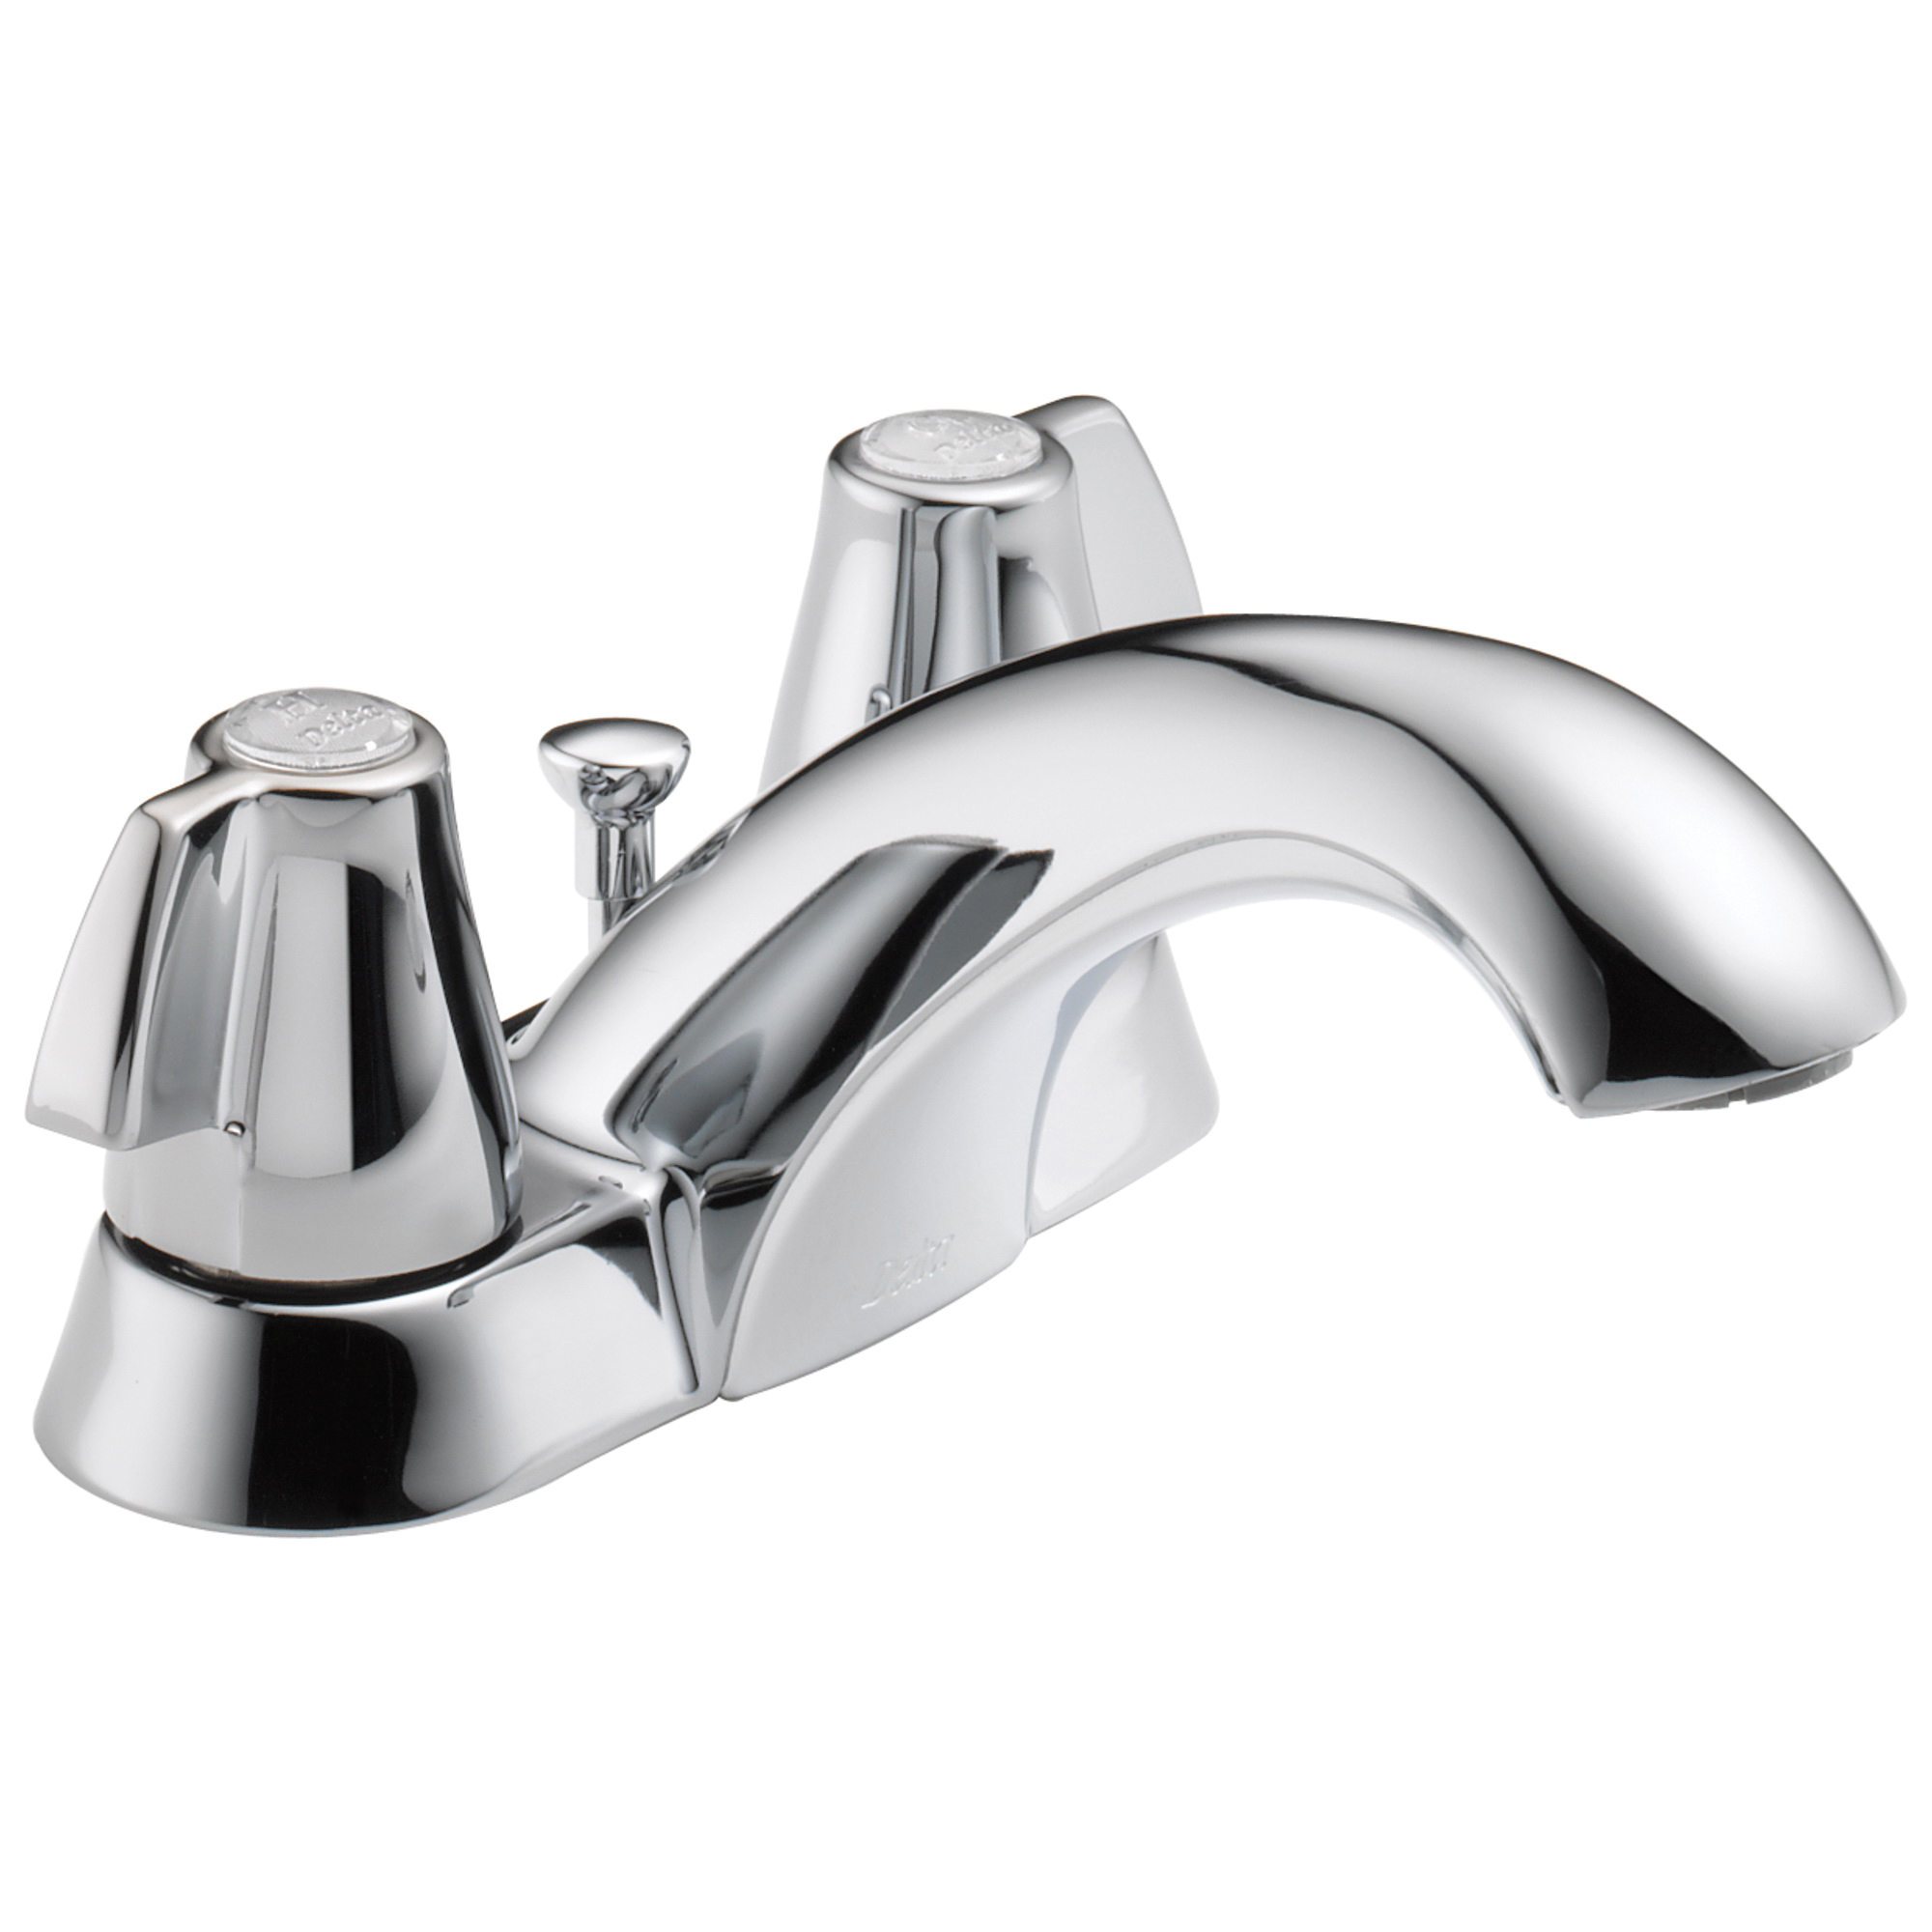 2520LF Centerset Lavatory Faucet, Classic, Chrome Plated, 2 Handles, 50/50 Pop-Up Drain, 1.2 gpm - Discontinued